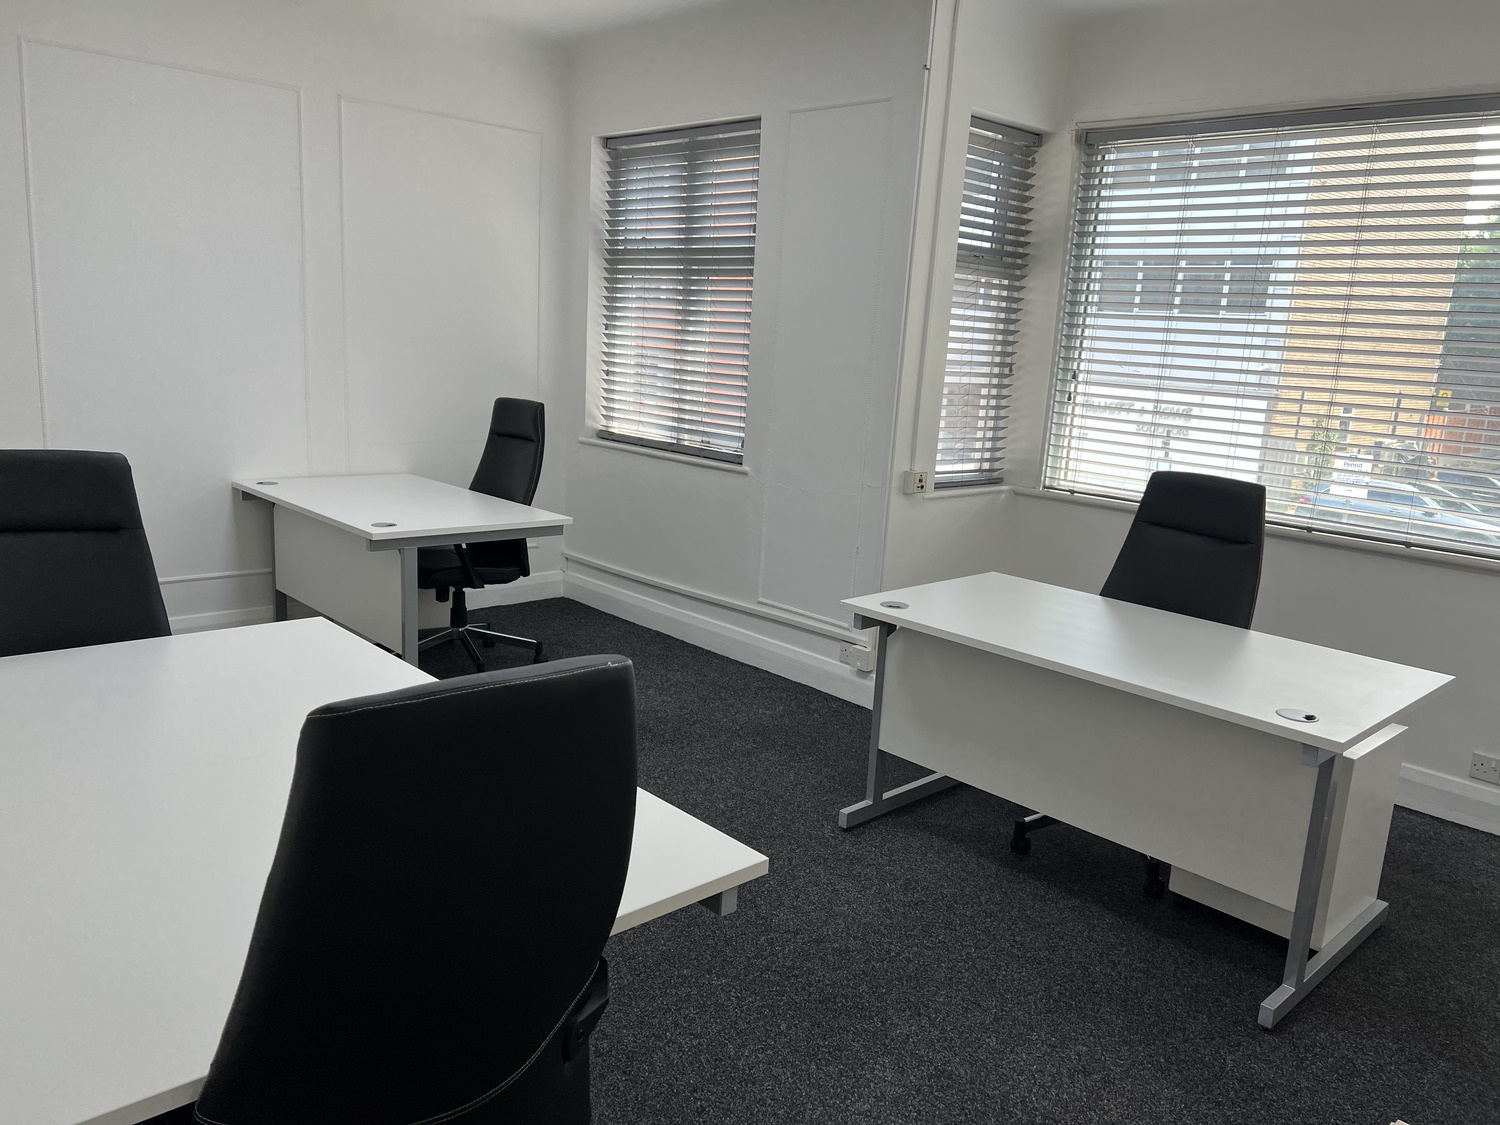 Offices in Romford